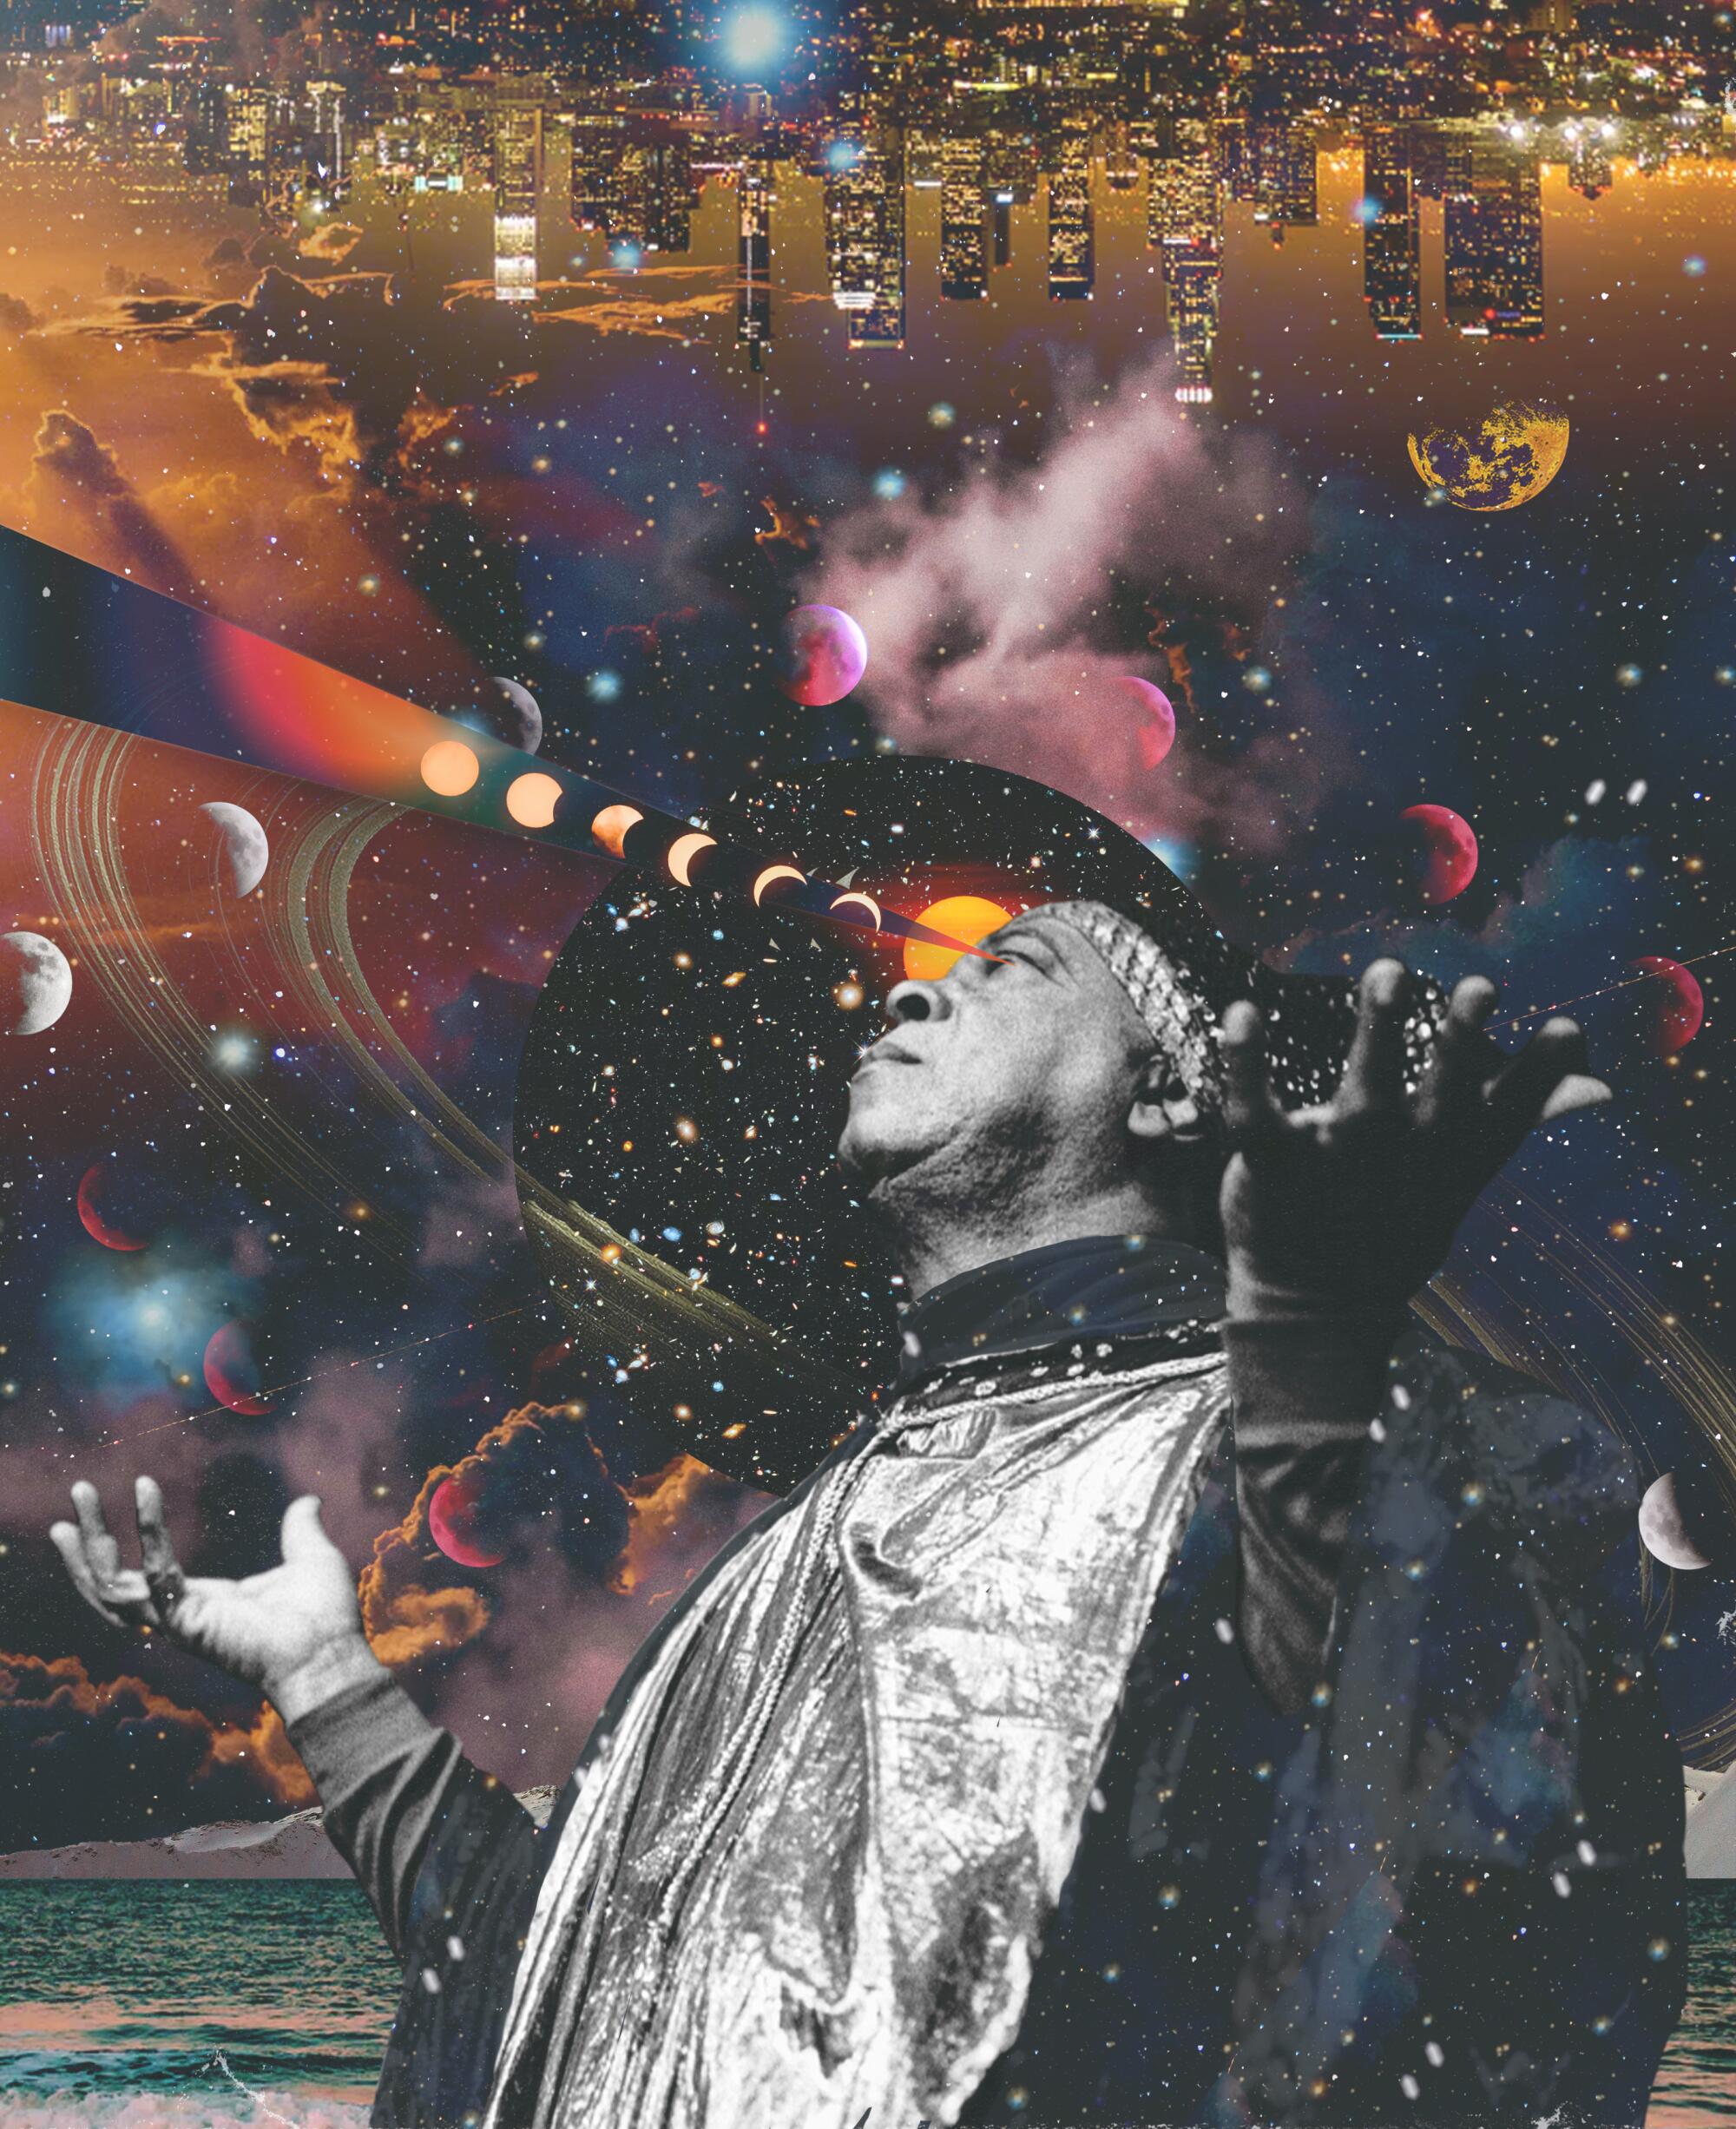 Collage of Sun Ra with his hands up surrounded by planets, galaxies, and Saturn's rings while moon shapes beam from his eye